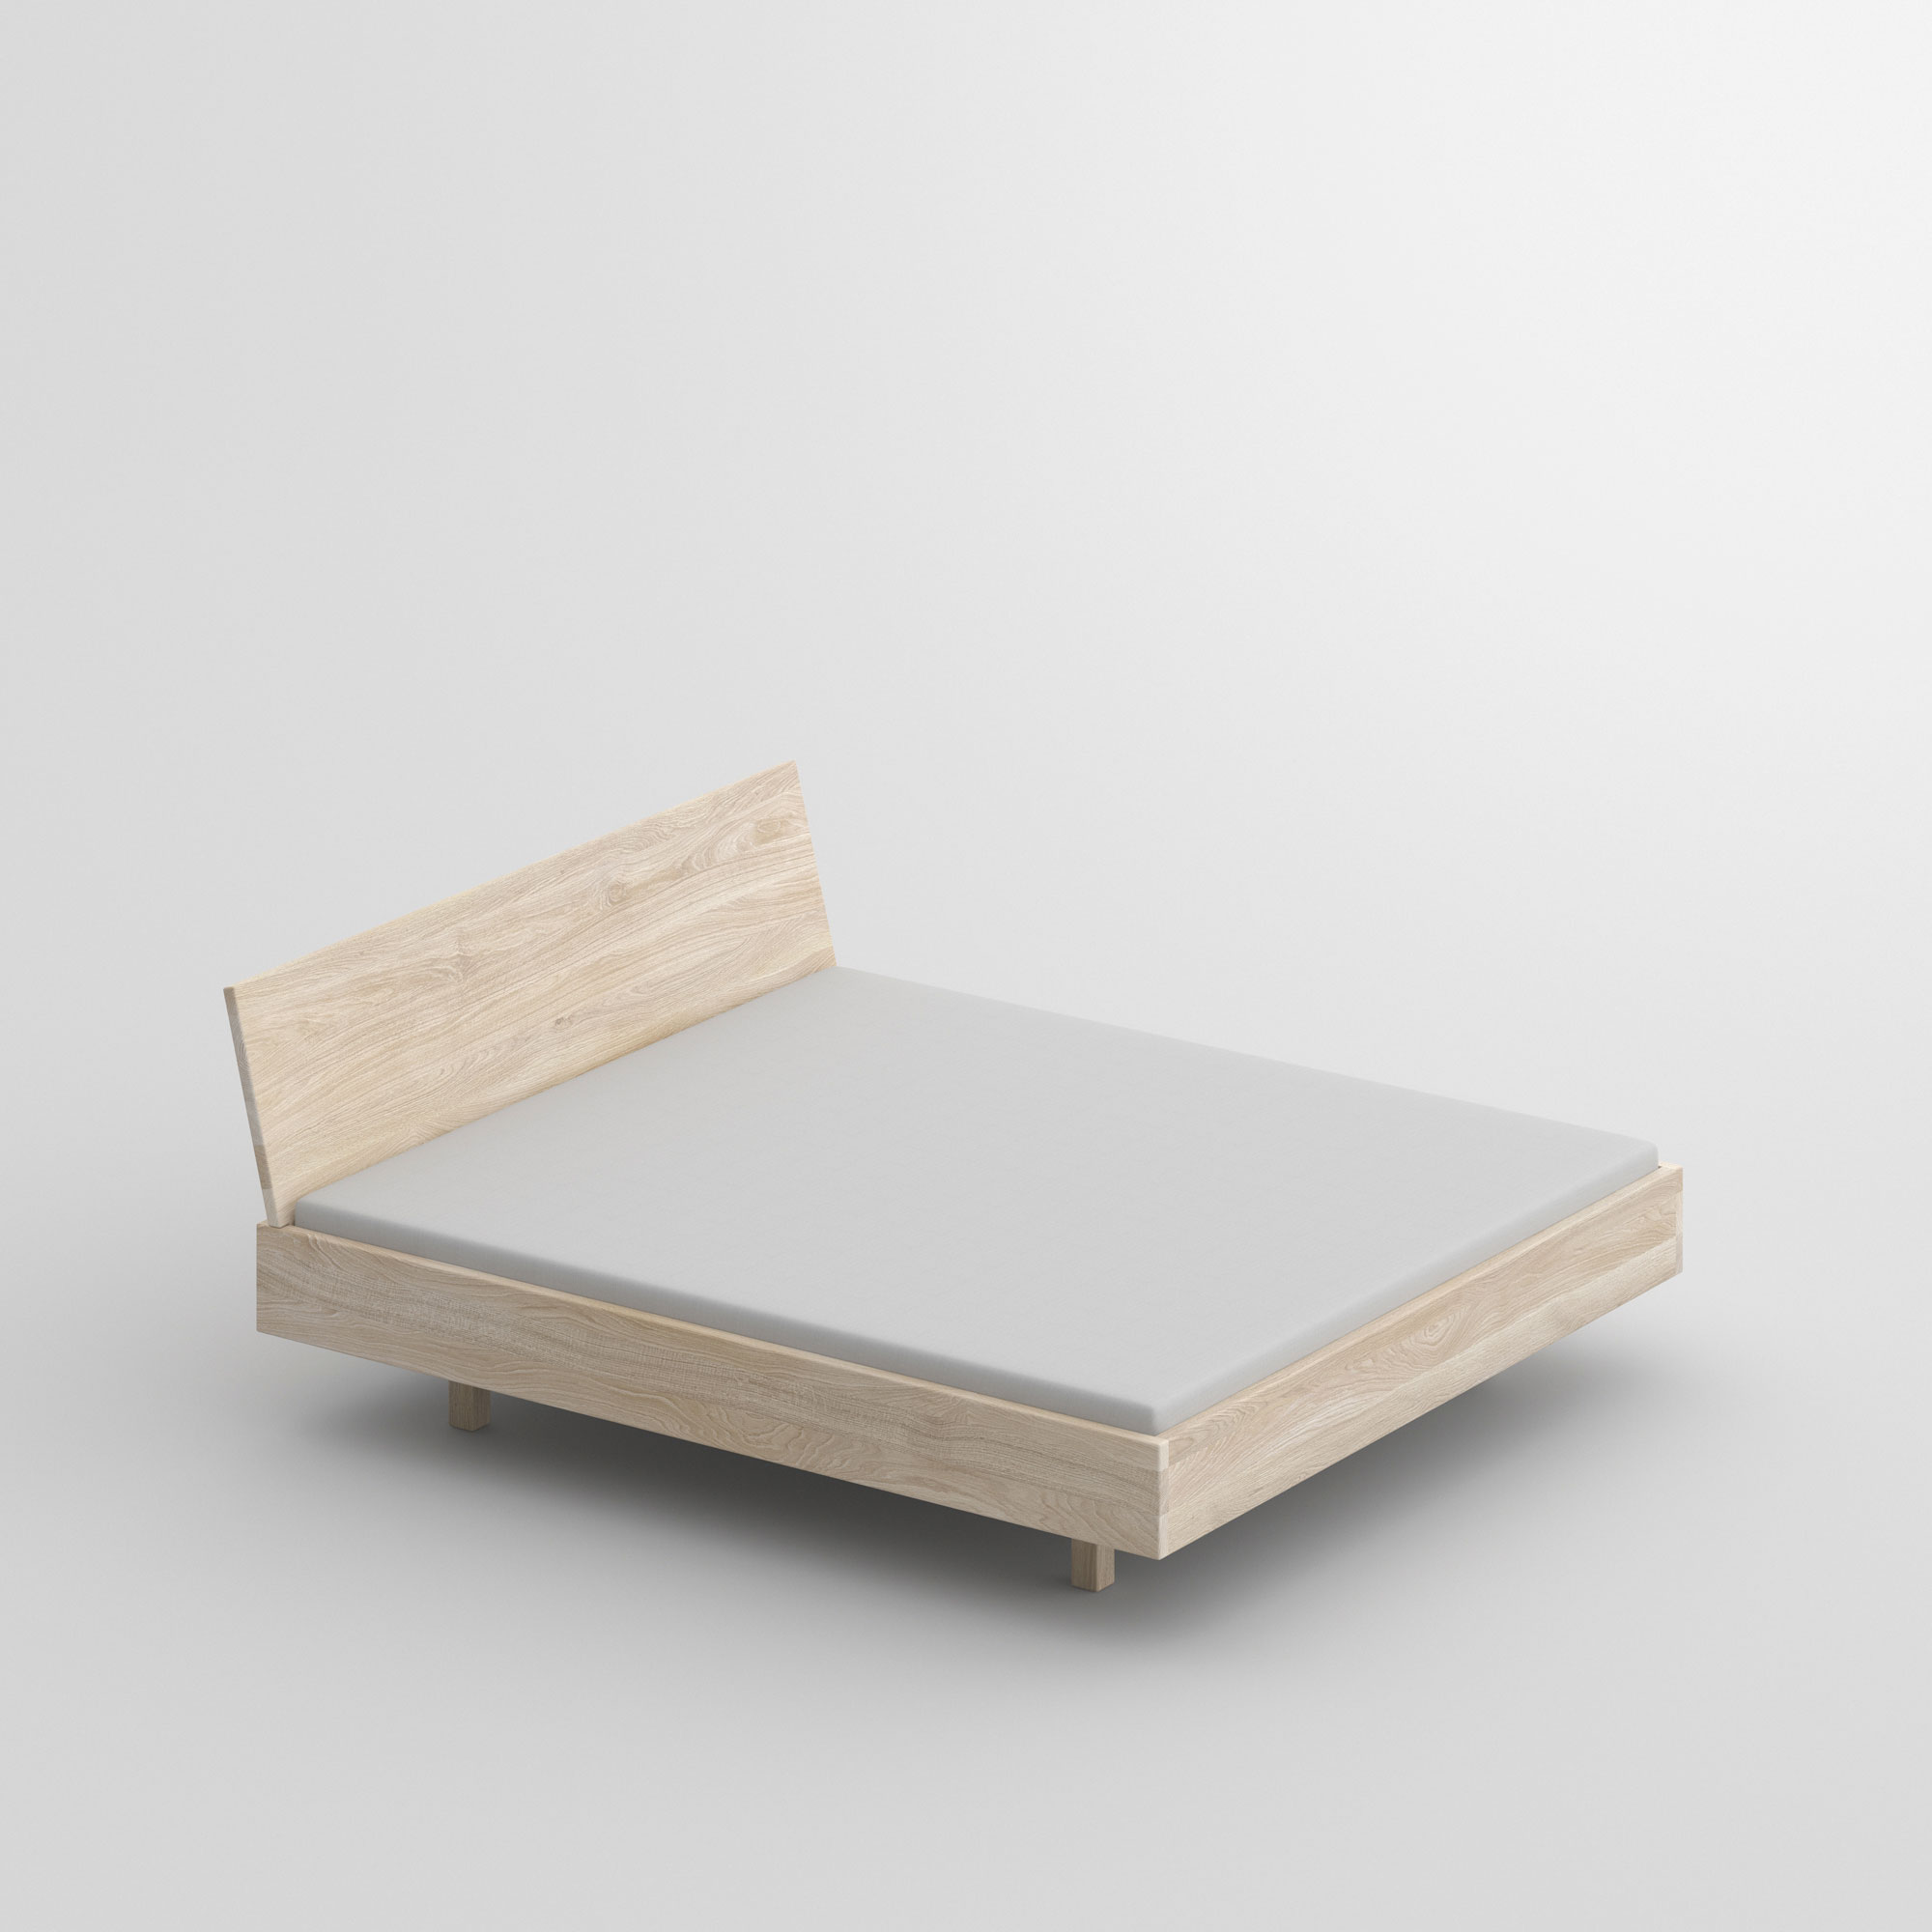 Solid Wooden Bed QUADRA SOFT cam1 custom made in solid wood by vitamin design